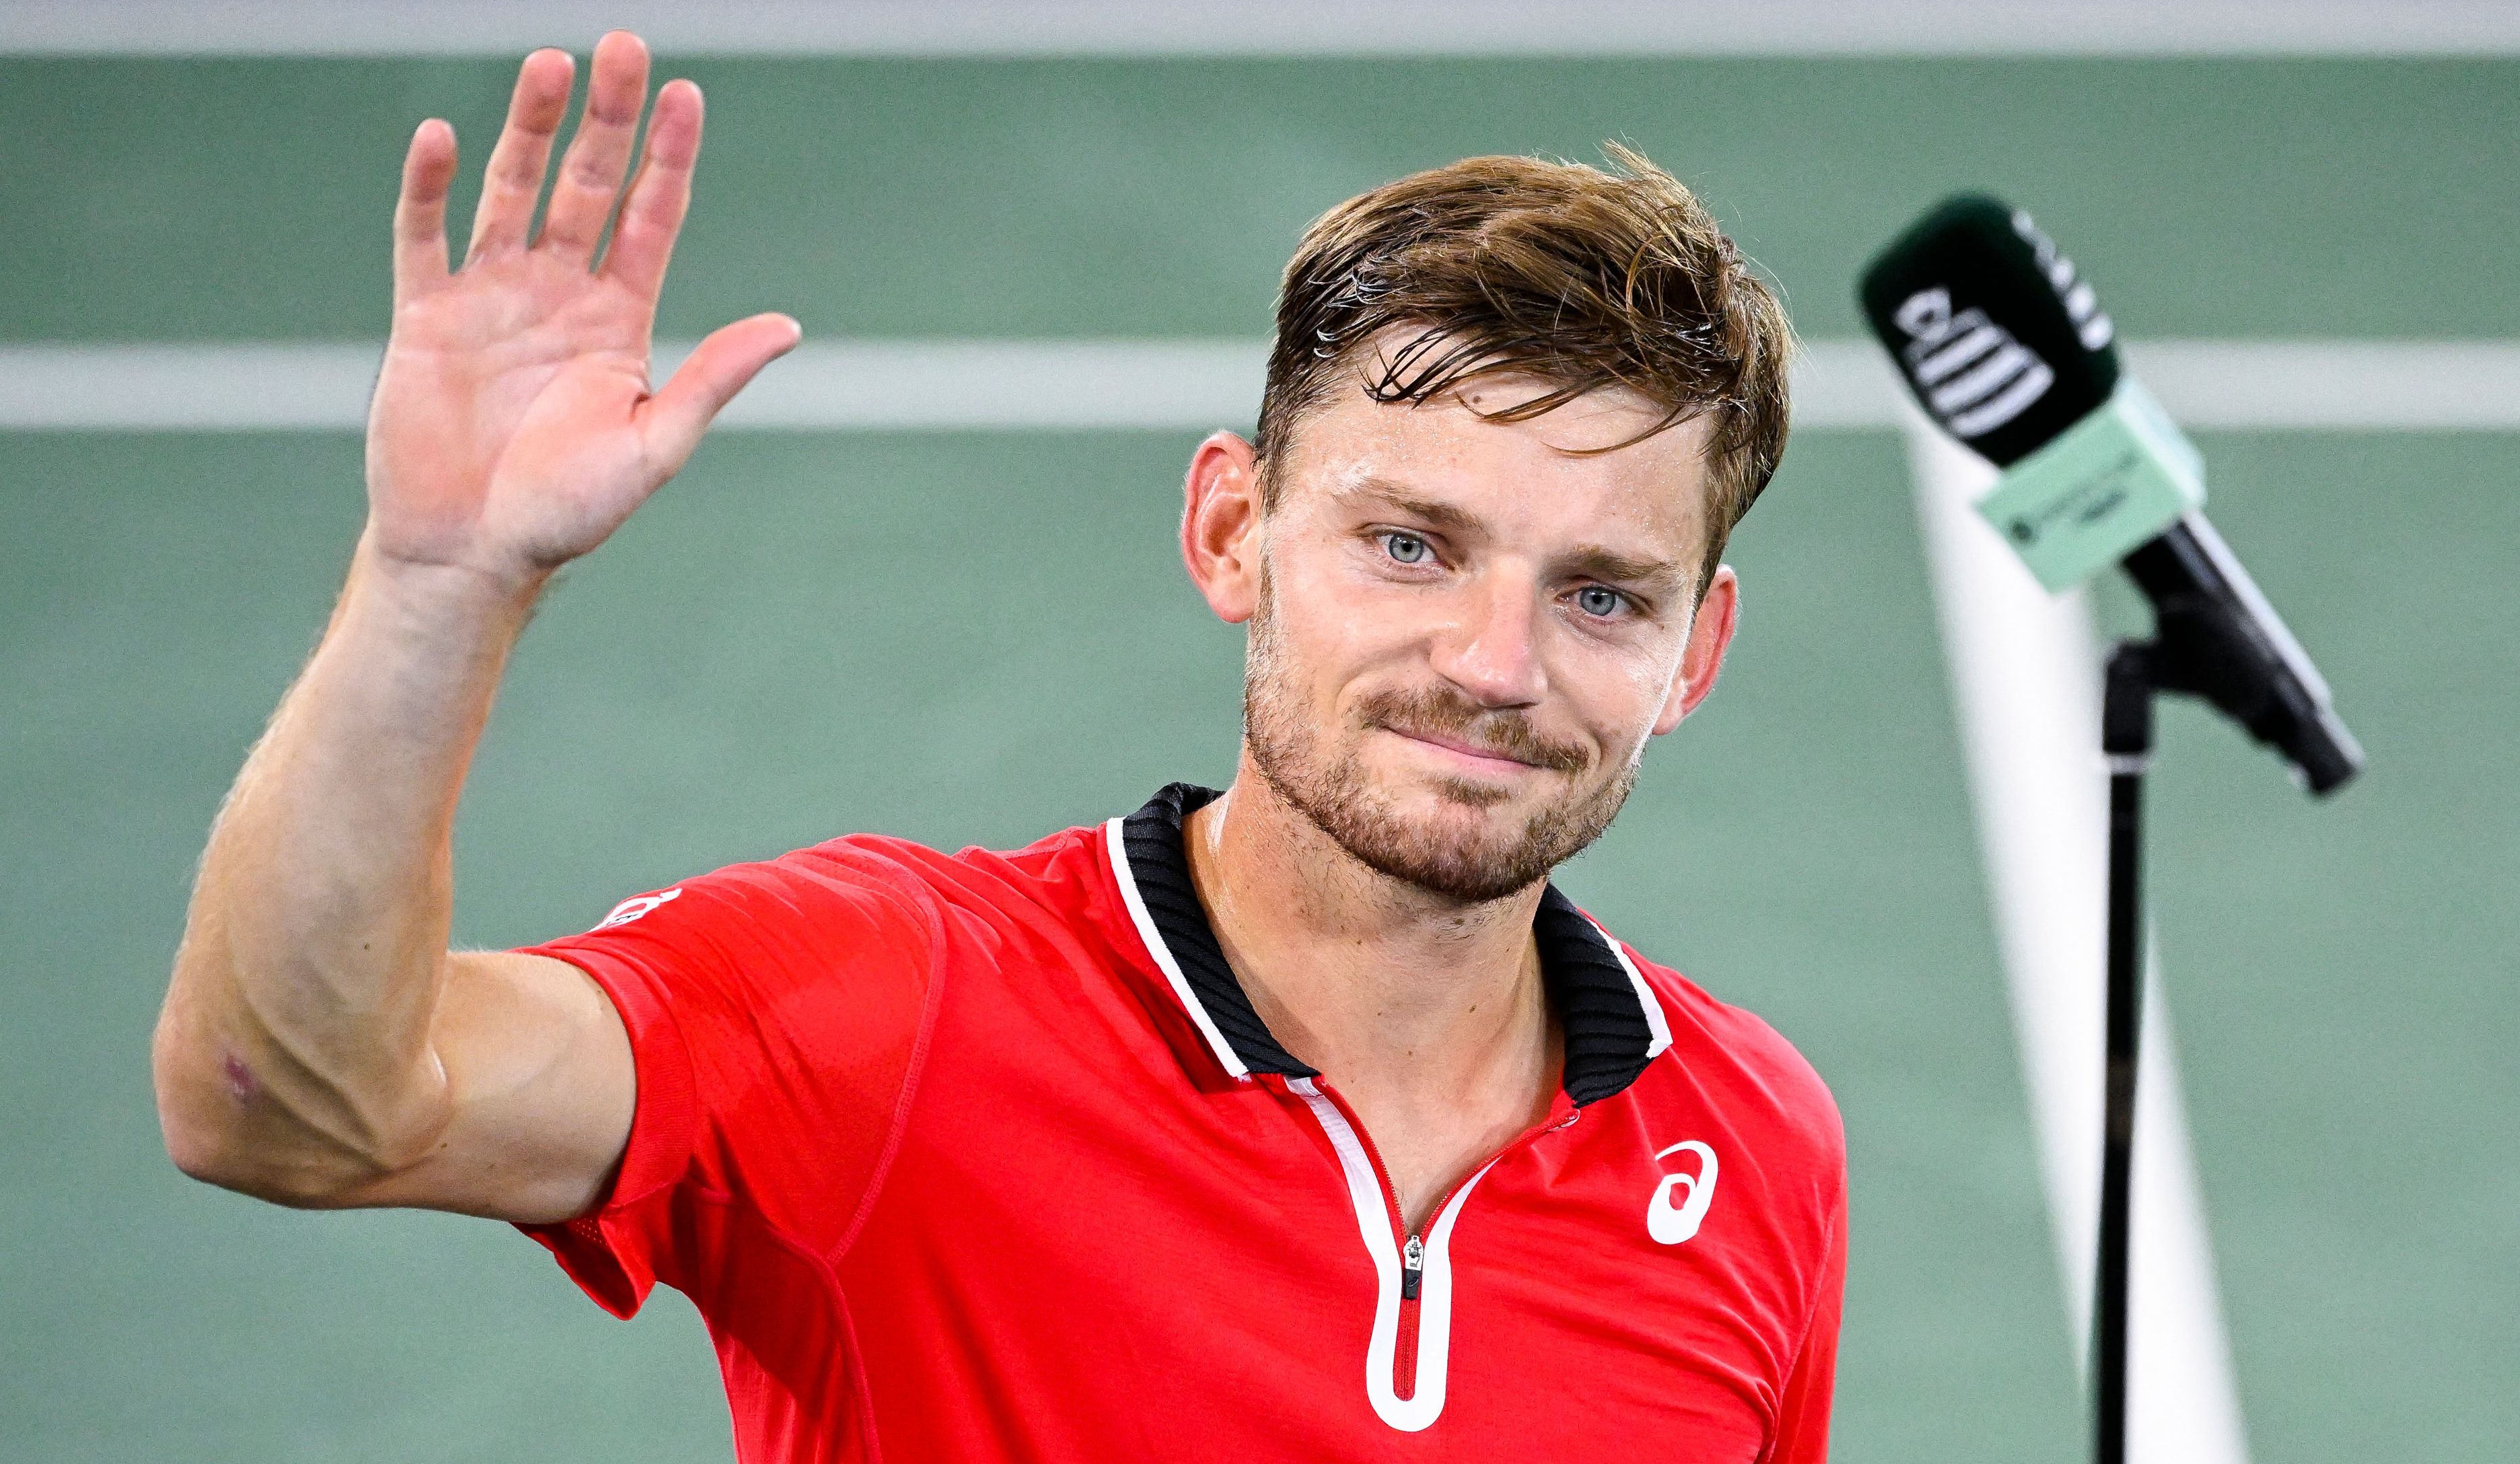 Stat of the Day David Goffin first player to defeat Carlos Alcaraz in straight sets in 11 months